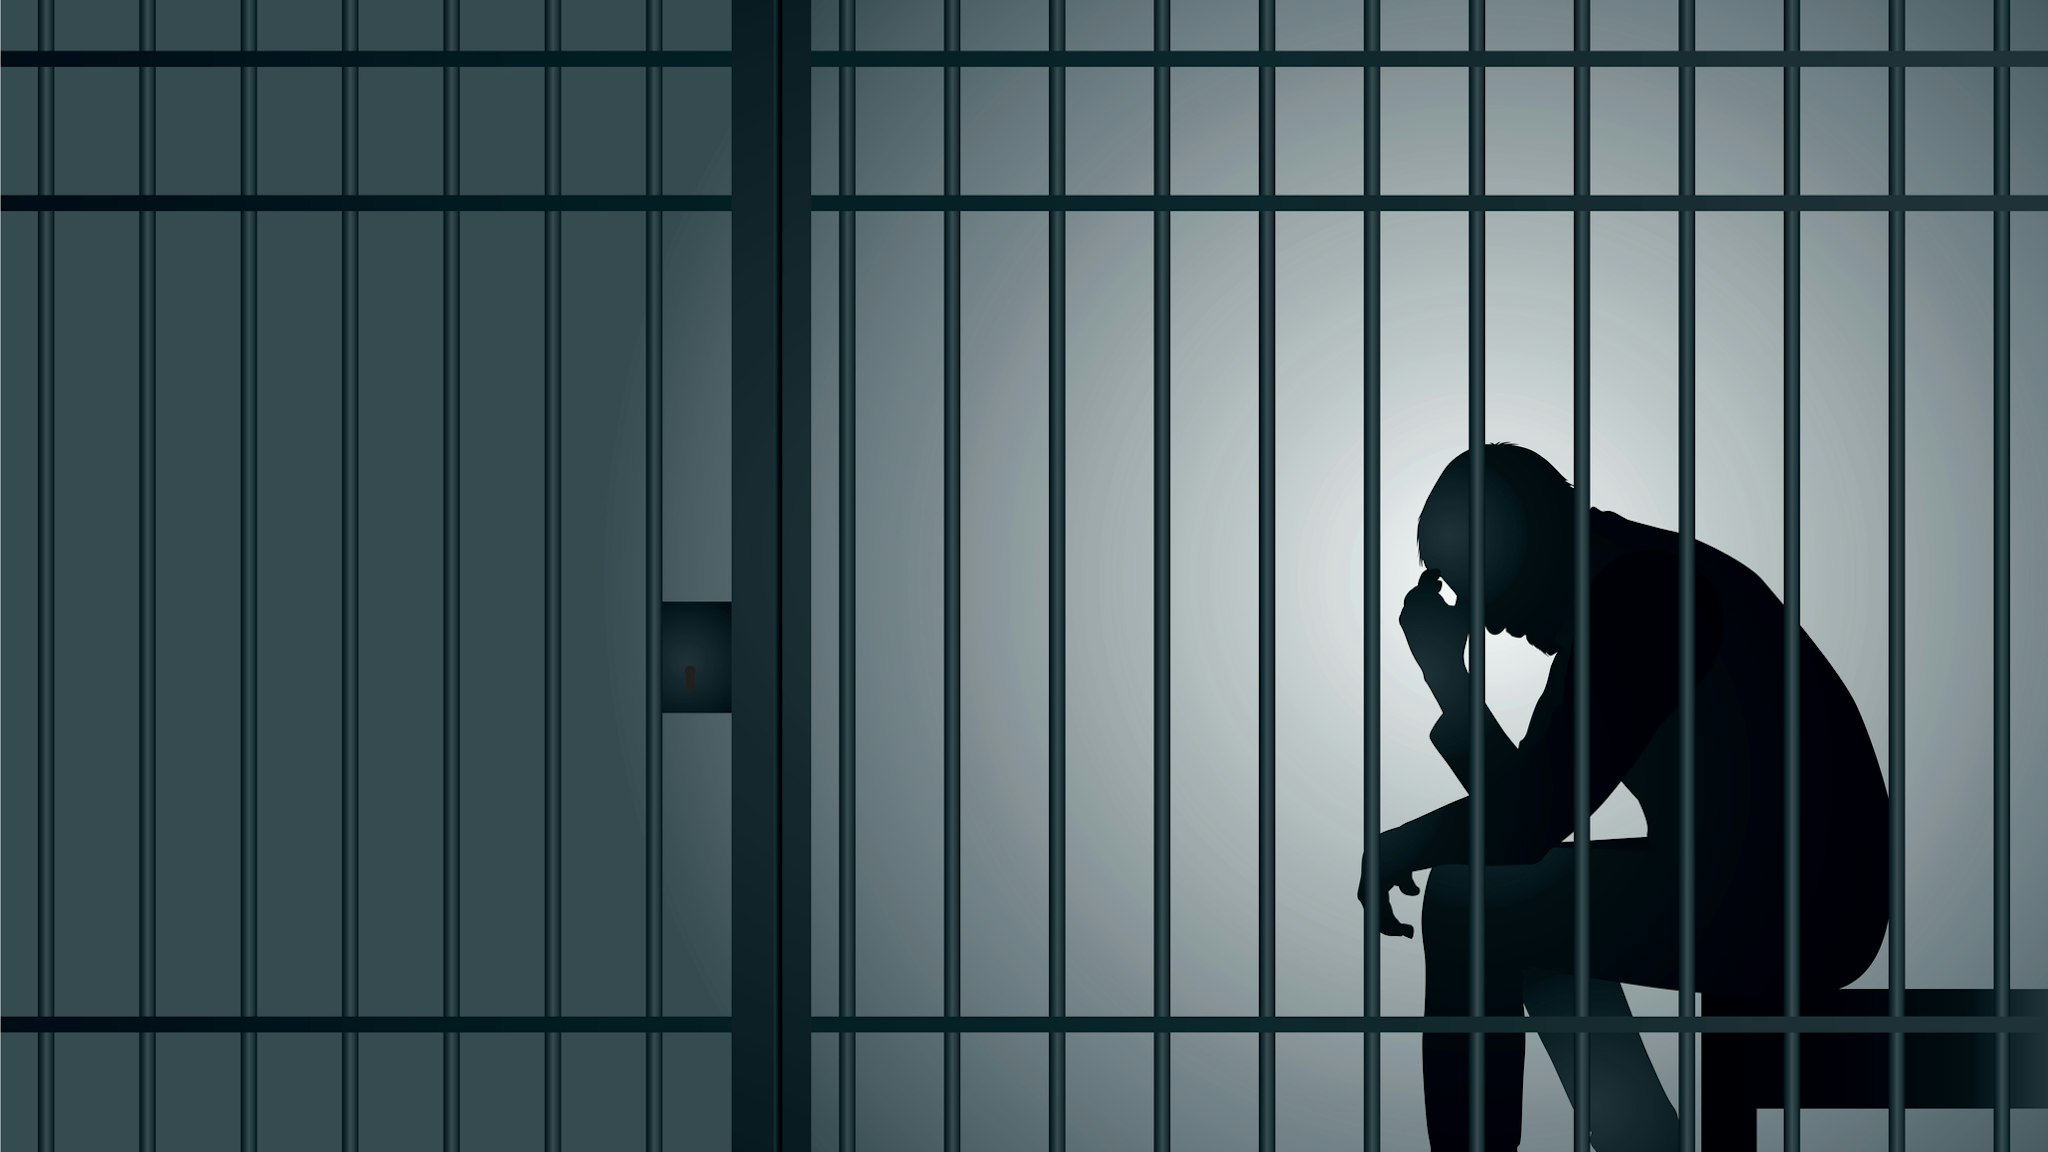 A symbol of a criminal's incarceration with a man imprisoned in a cell. - stock vector